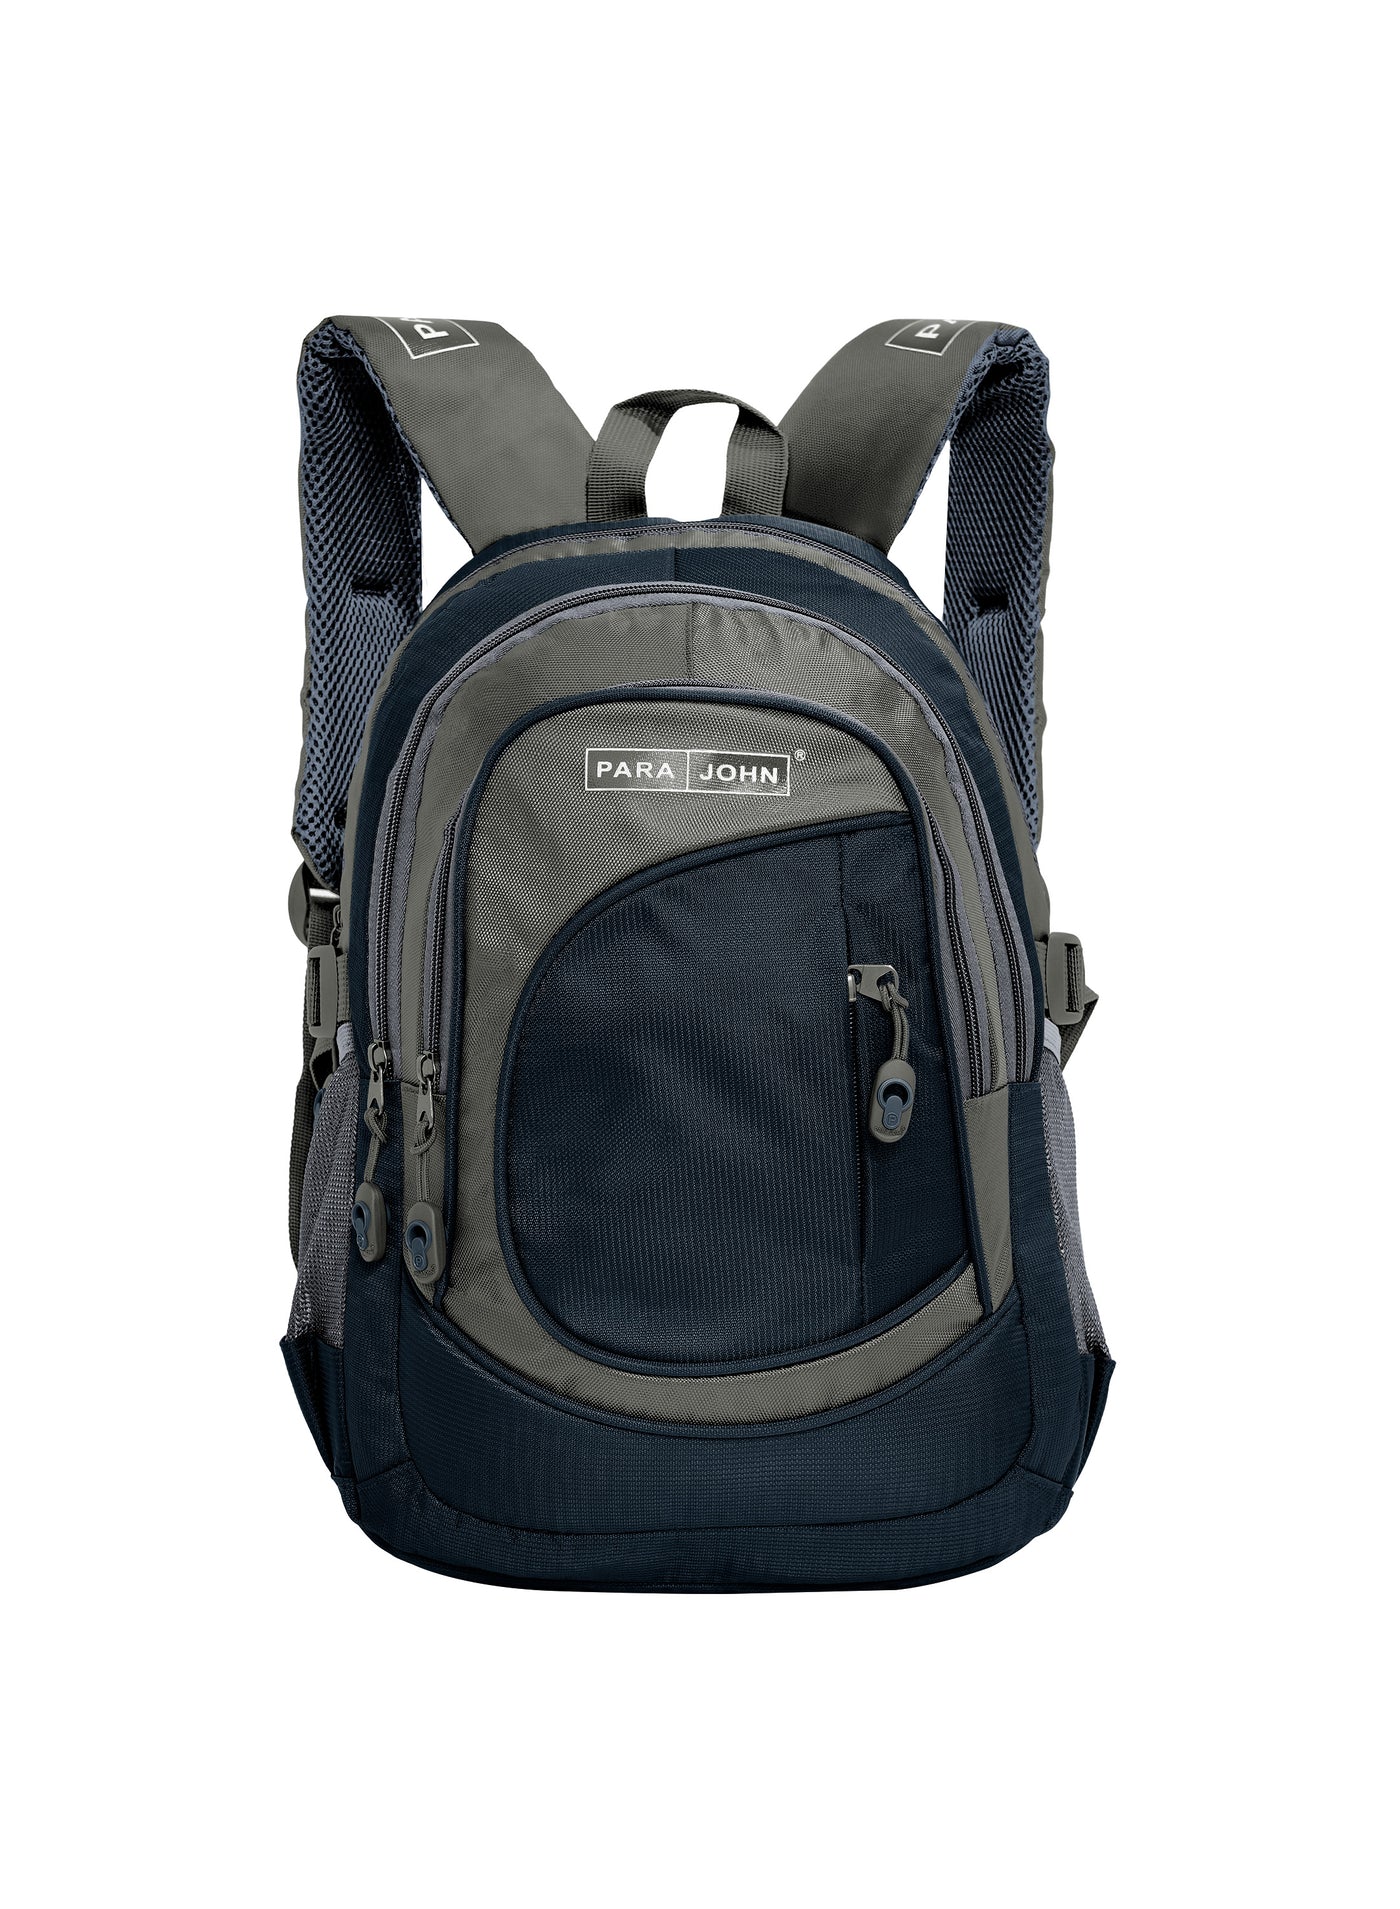 Classic Students School Backpack Navy 18 Inch